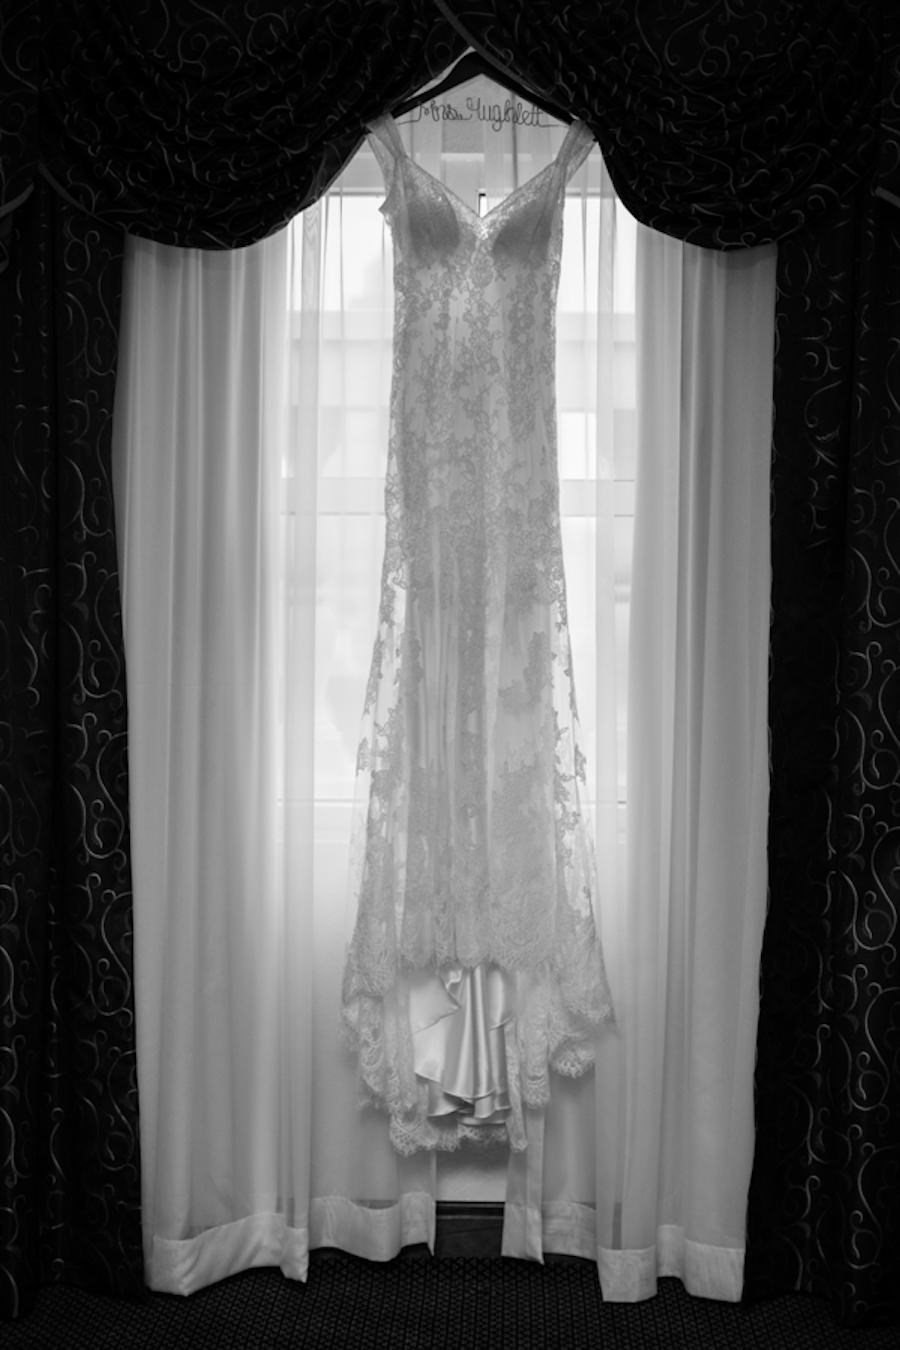 Ivory, Lace, Allure Bridal Wedding Dress on Customized Hanger with Groom's Last Name